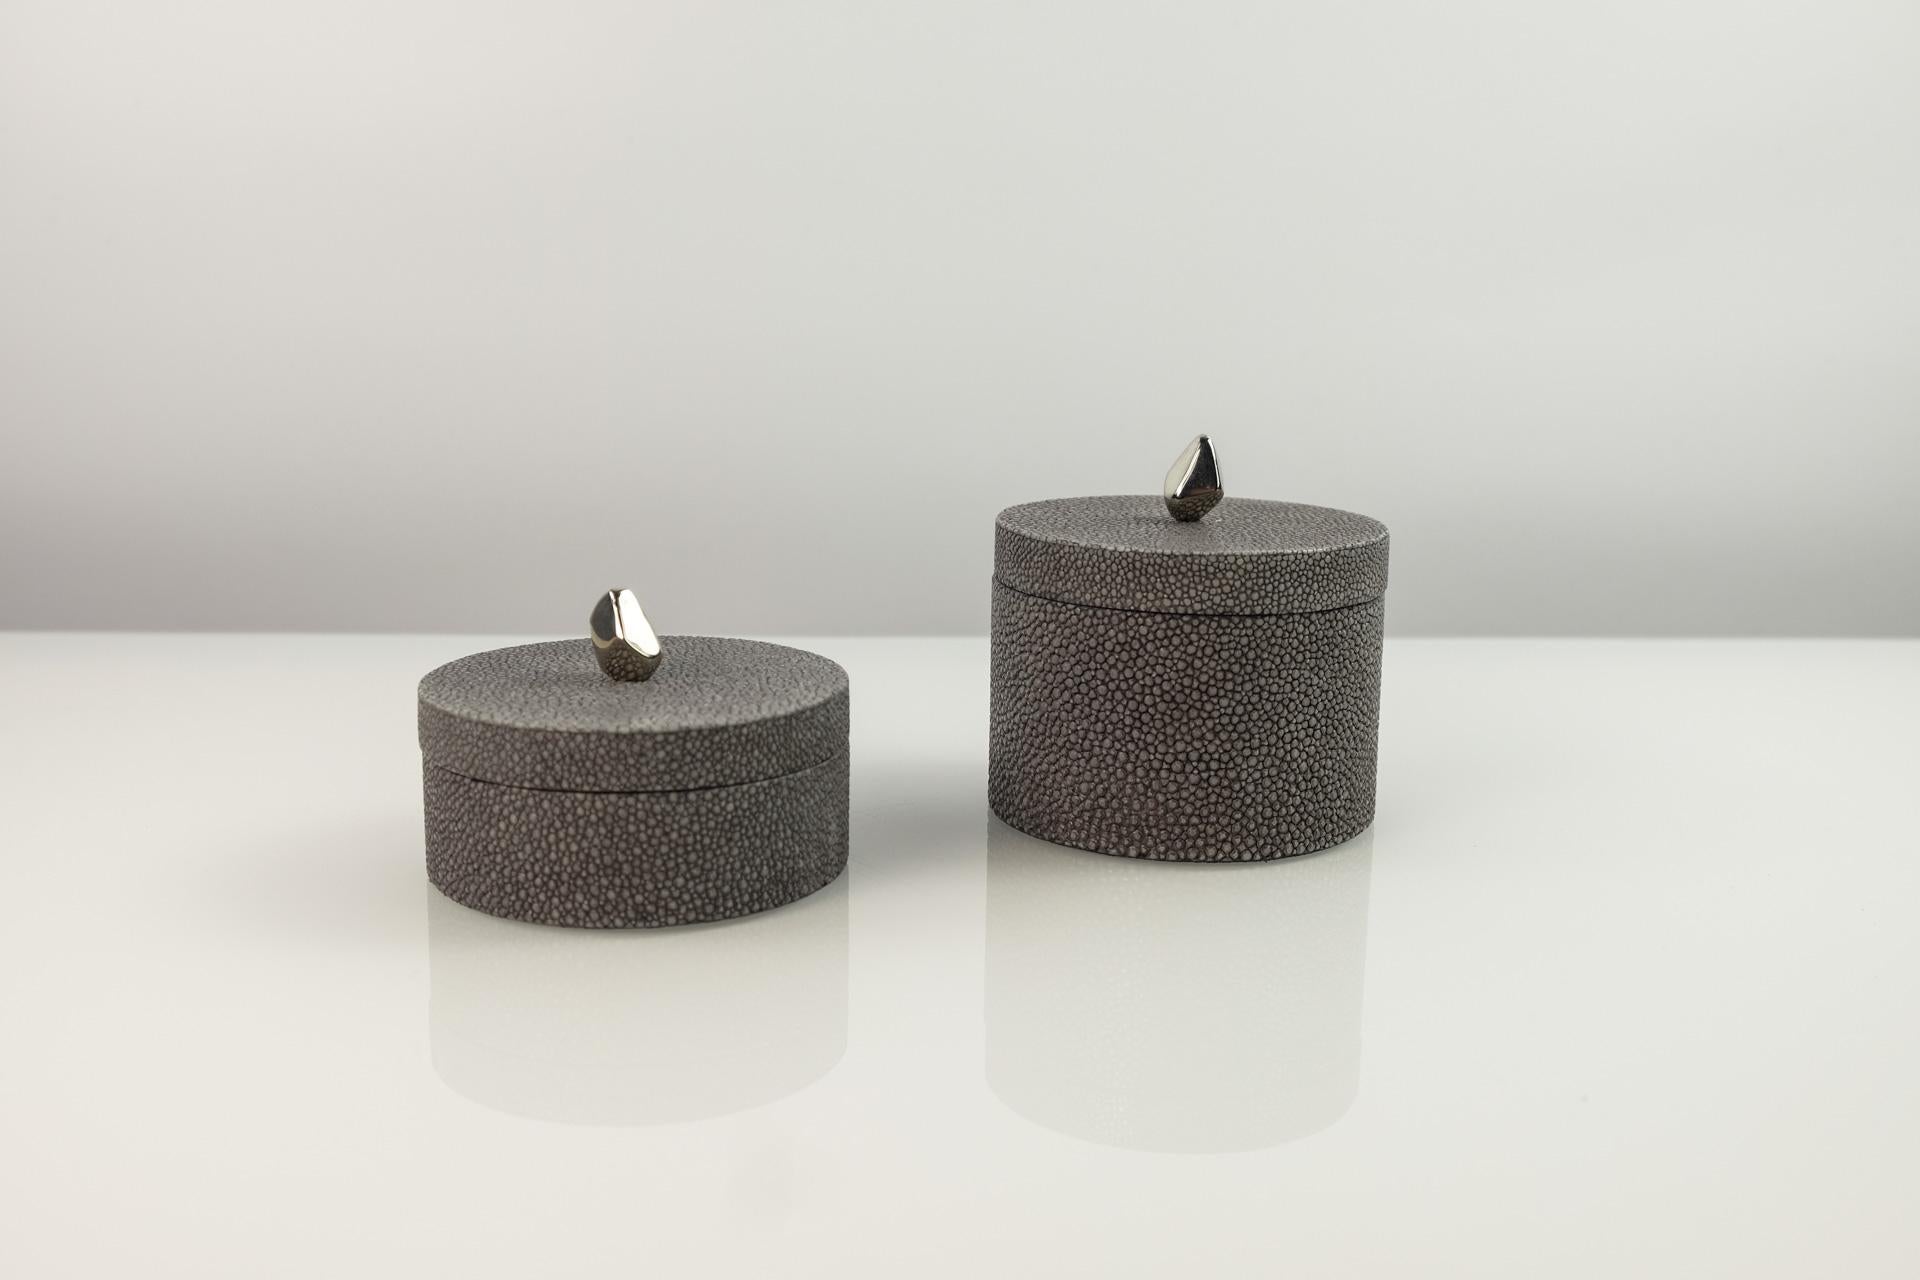 This set of 2 round boxes is made of shagreen.
These boxes have a nickel brass handle. 

They are lined with a black micro suede.

The color of this box is dark grey.

The dimensions of each piece is:
Diam 3.34